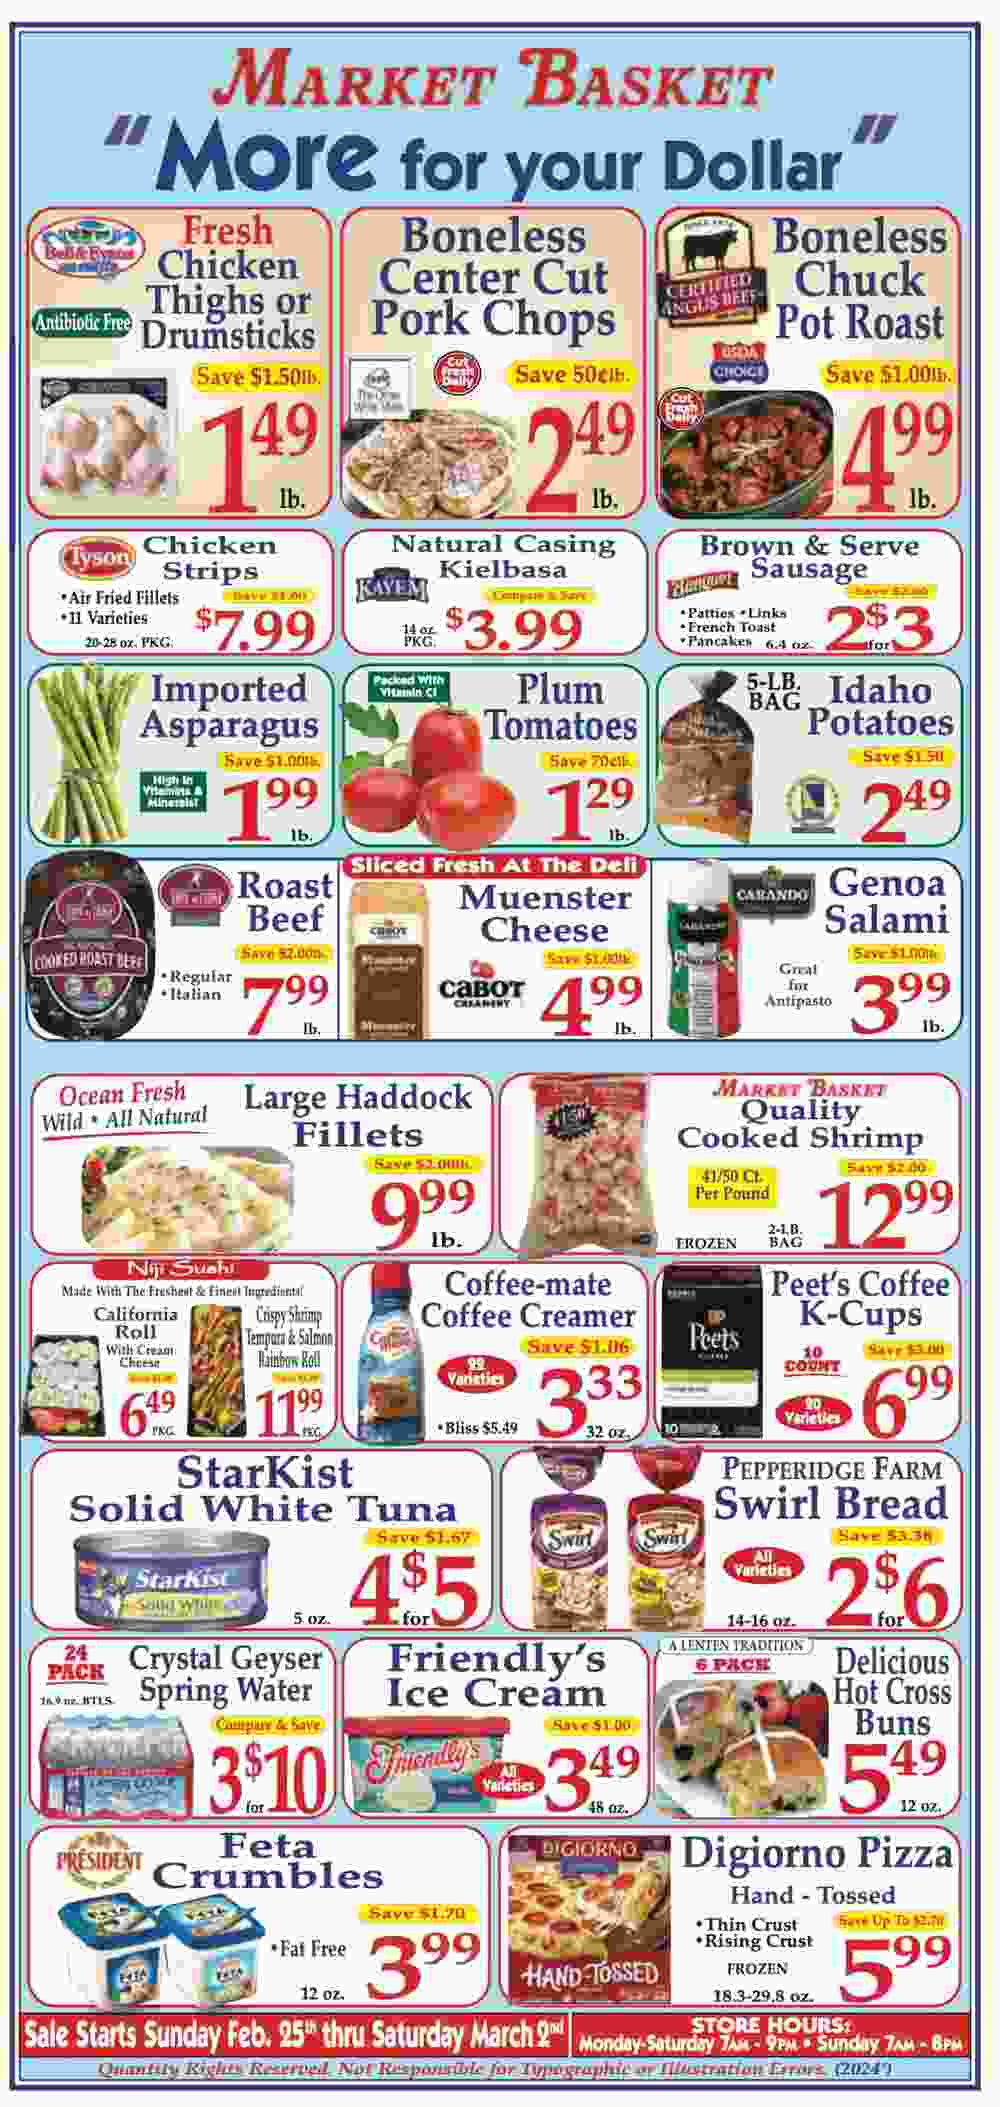 Market Basket Weekly Ad February 25 to March 2, 2024 2024 1 – market basket ad 1 2 scaled 1